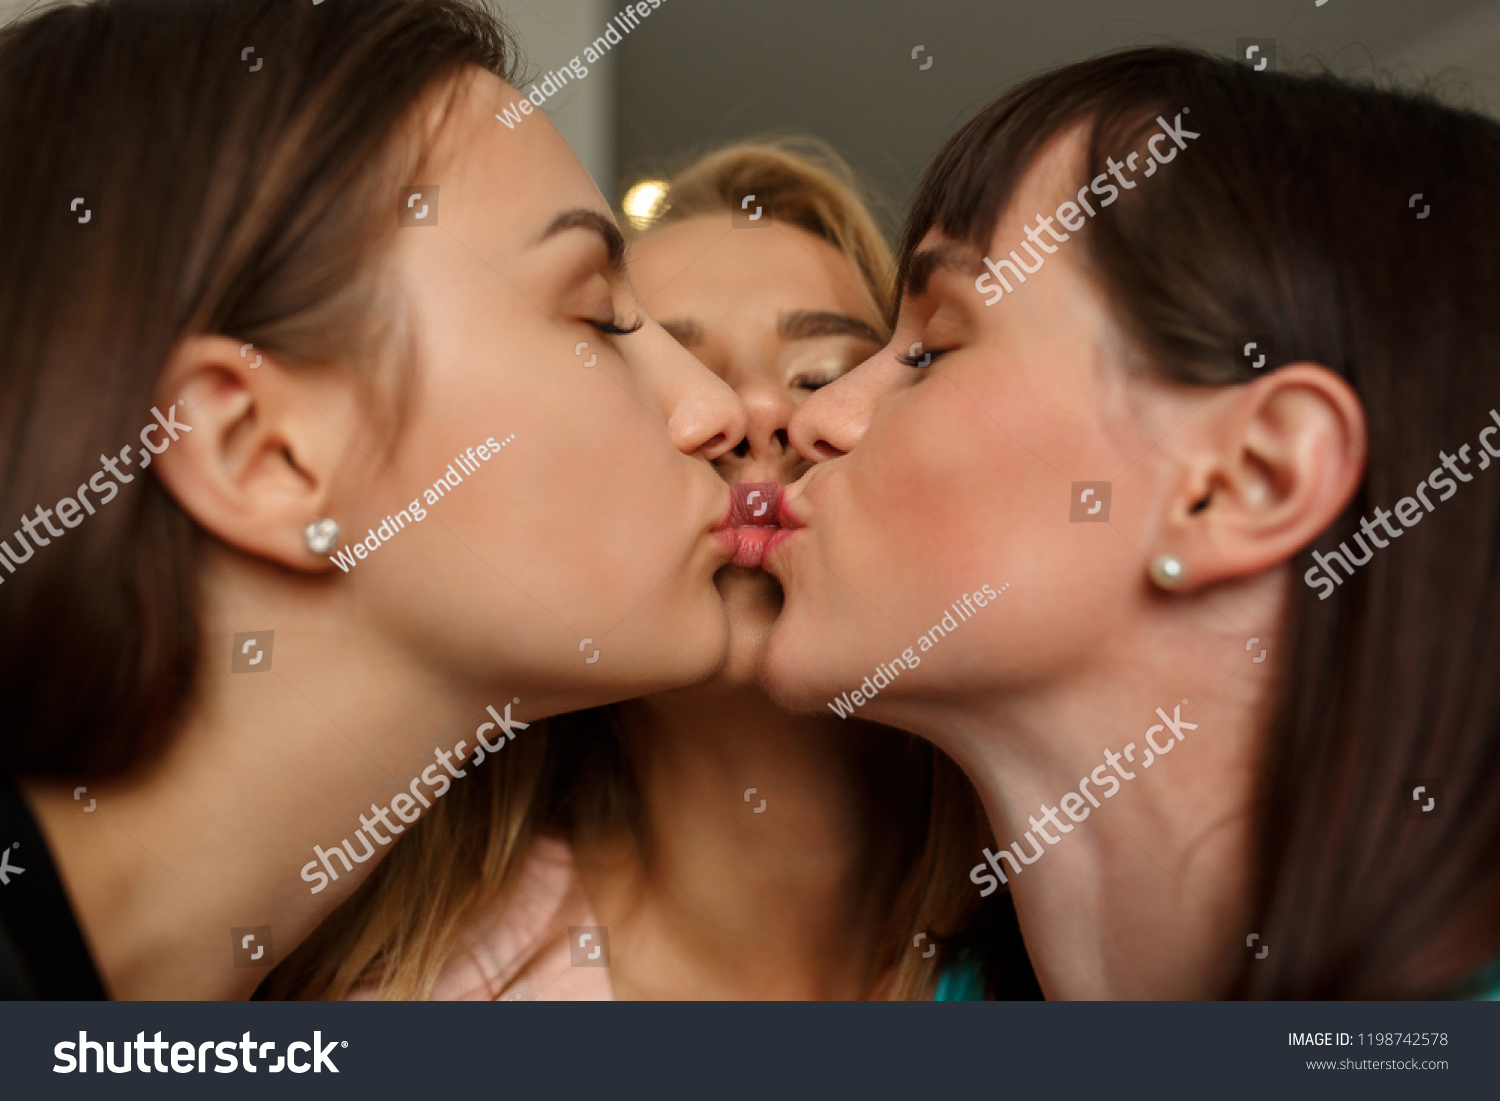 Sidn sexist two lesbians kissing